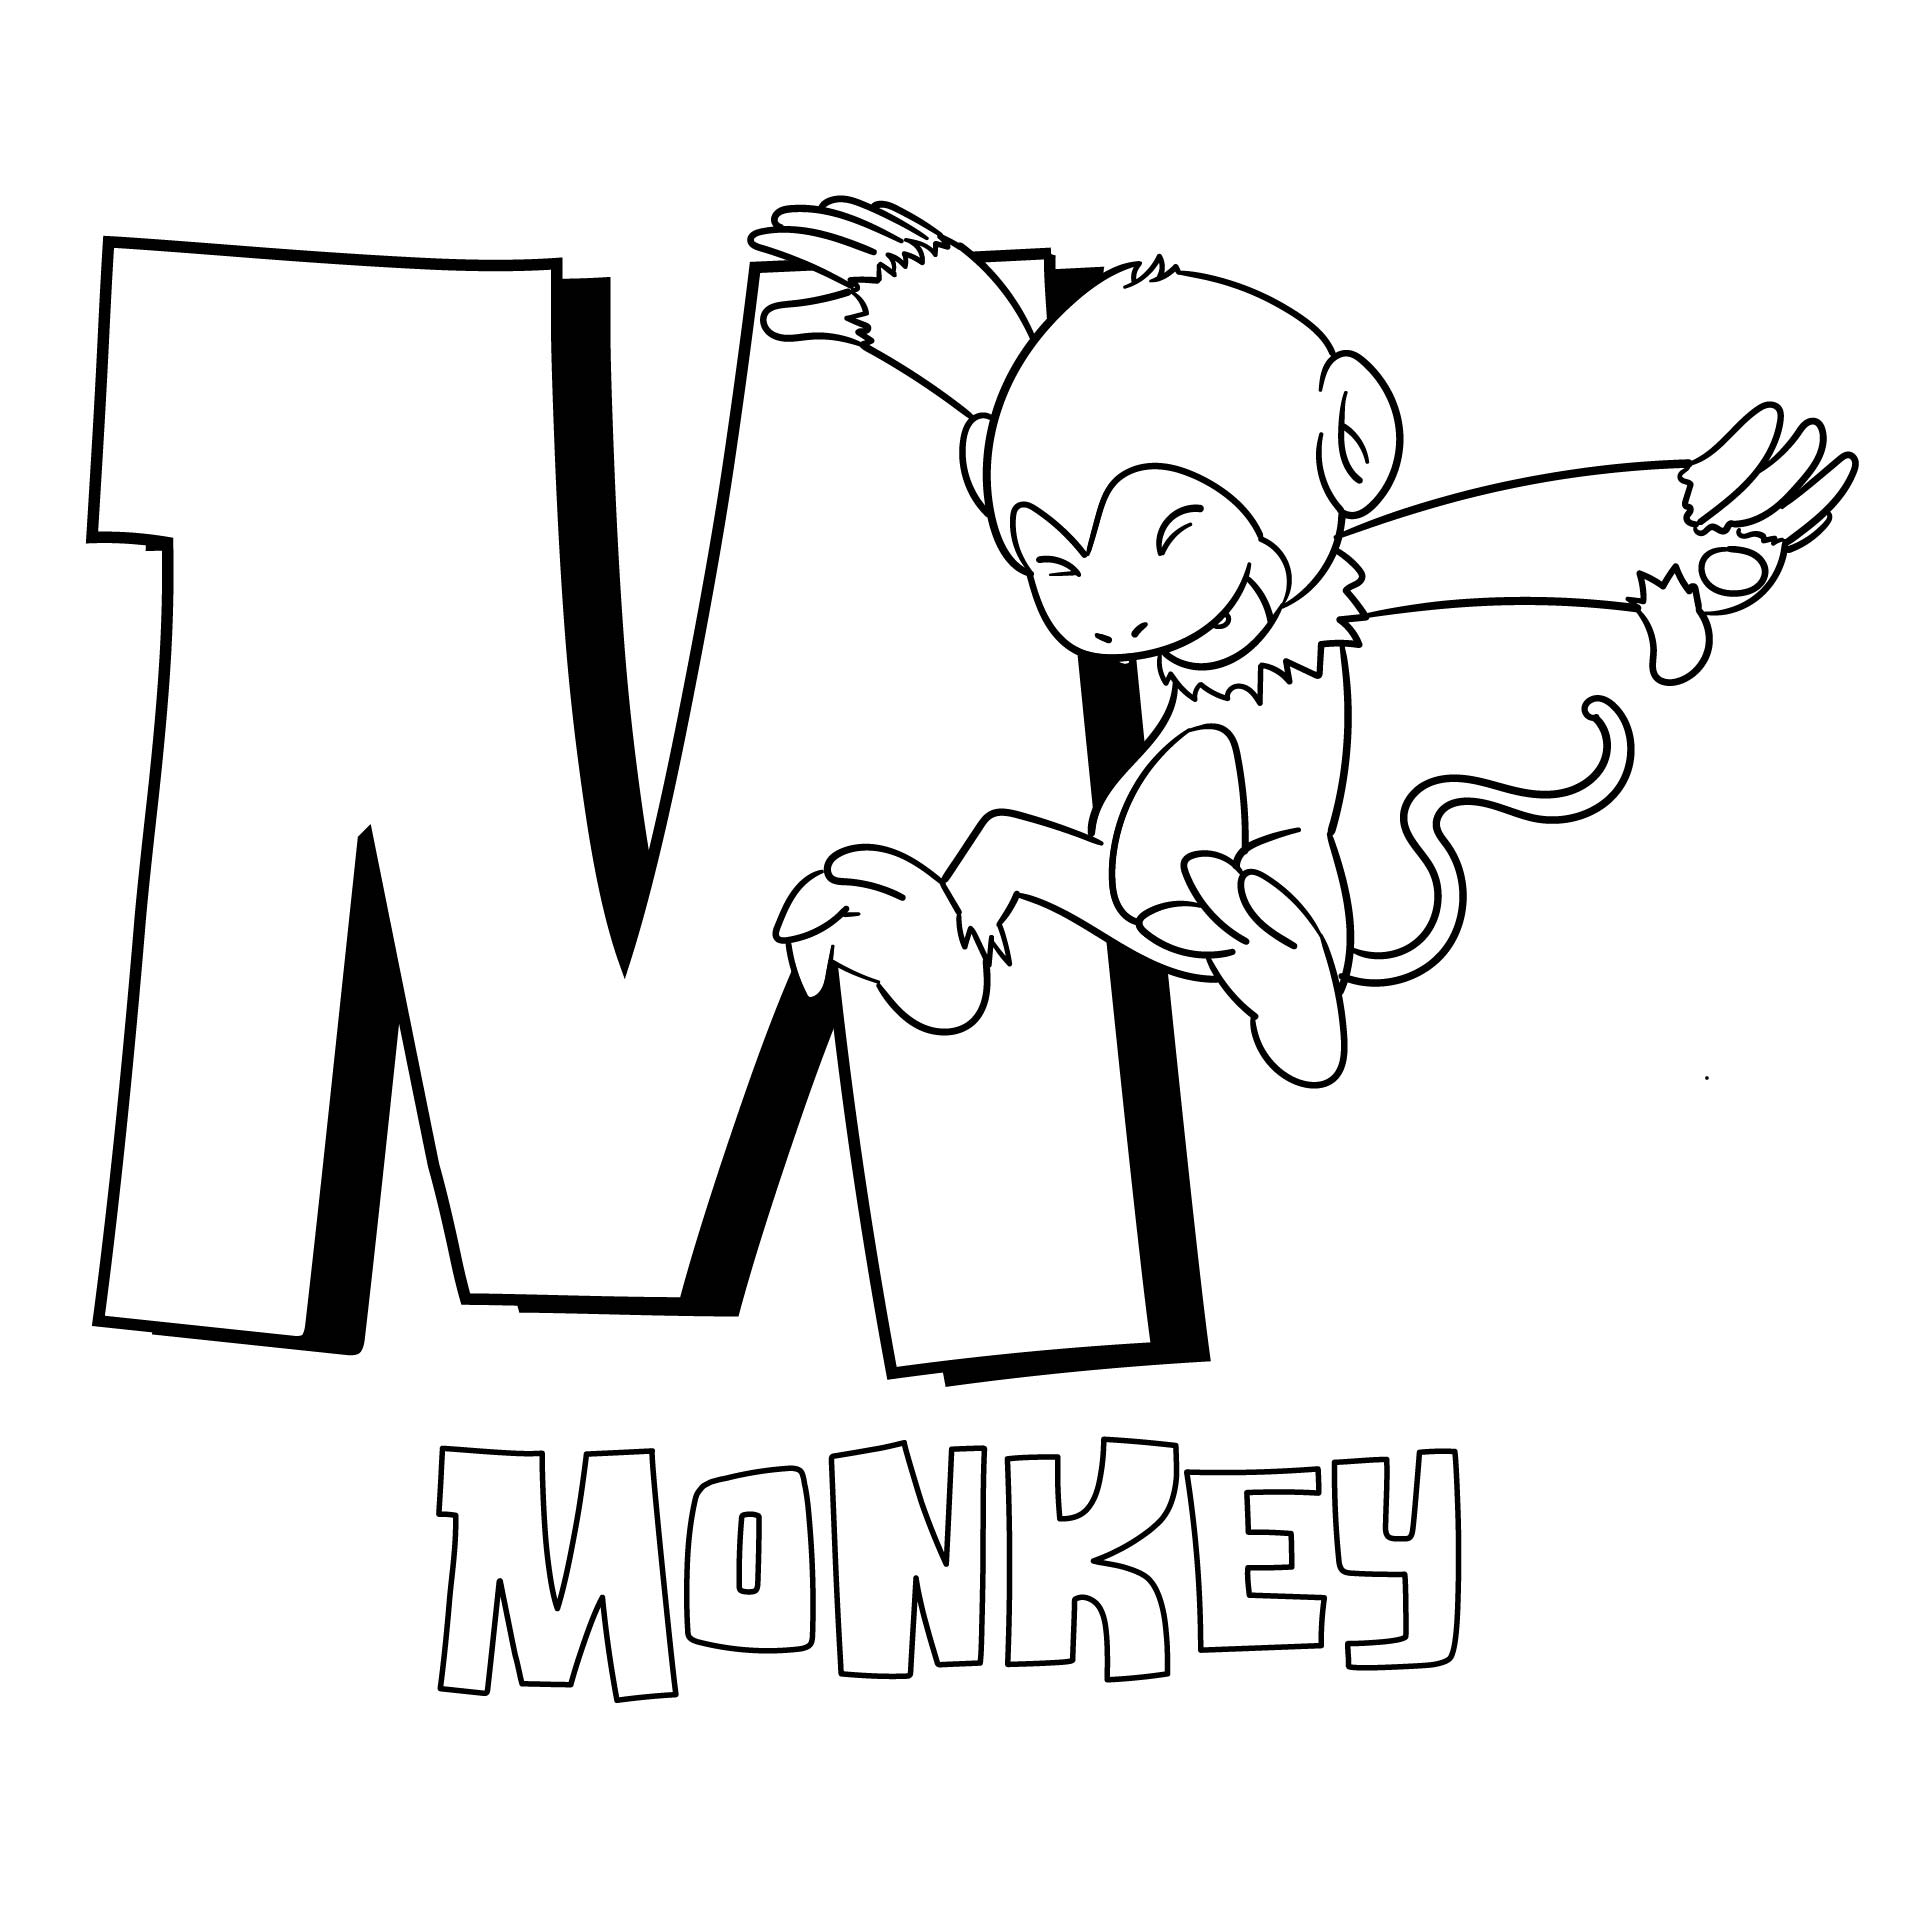 Printable Preschool Letter M Coloring Pages